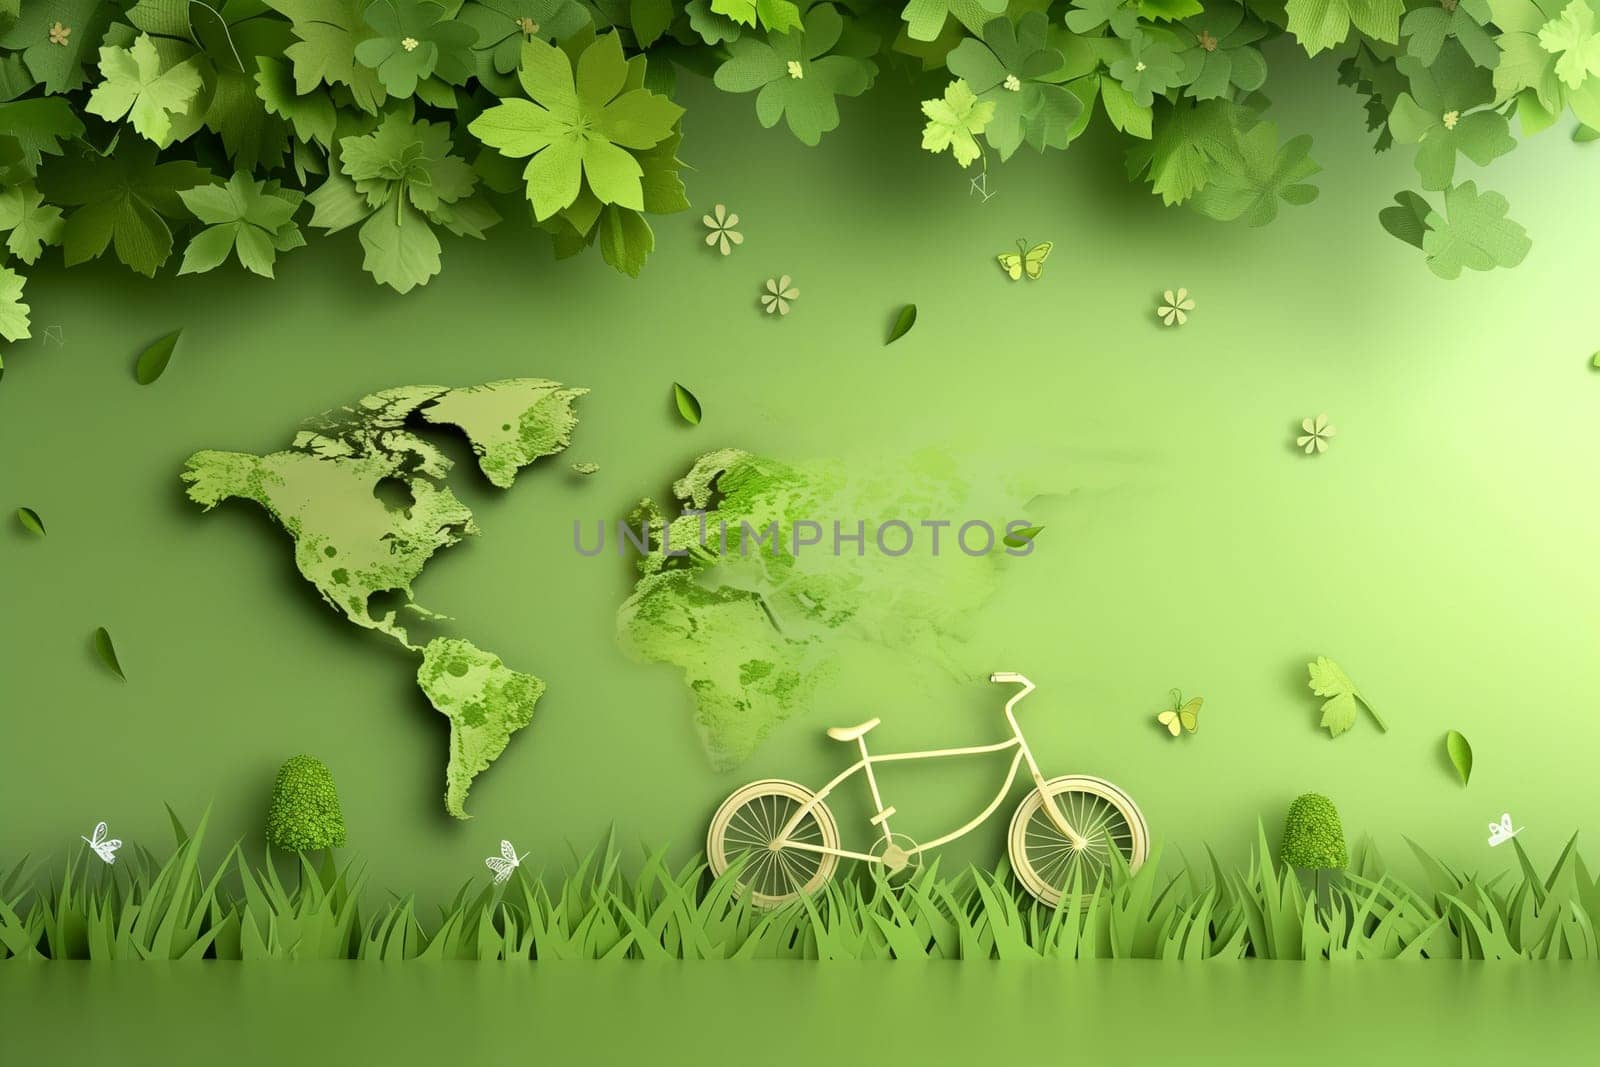 A bicycle resting against a world map on a vibrant green background.